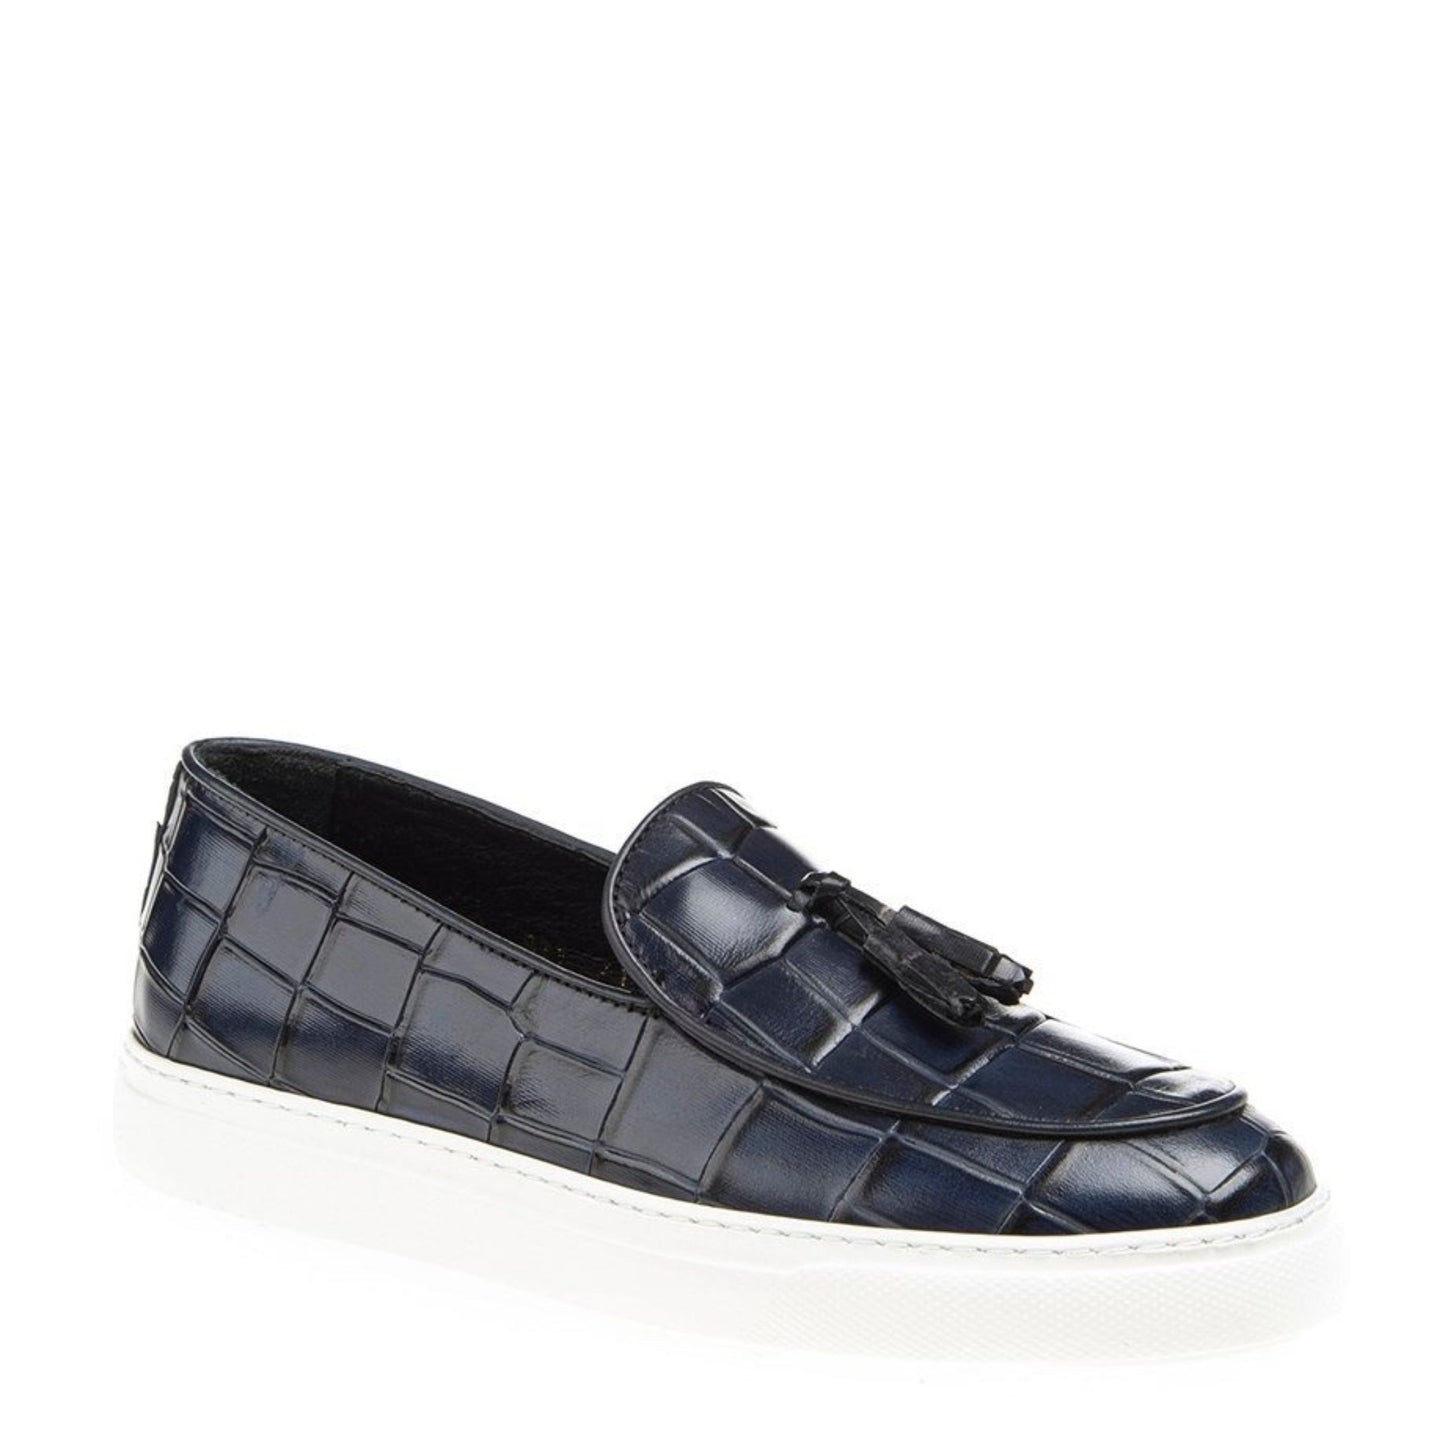 Madasat Navy blue Leather Loafer - 366 |